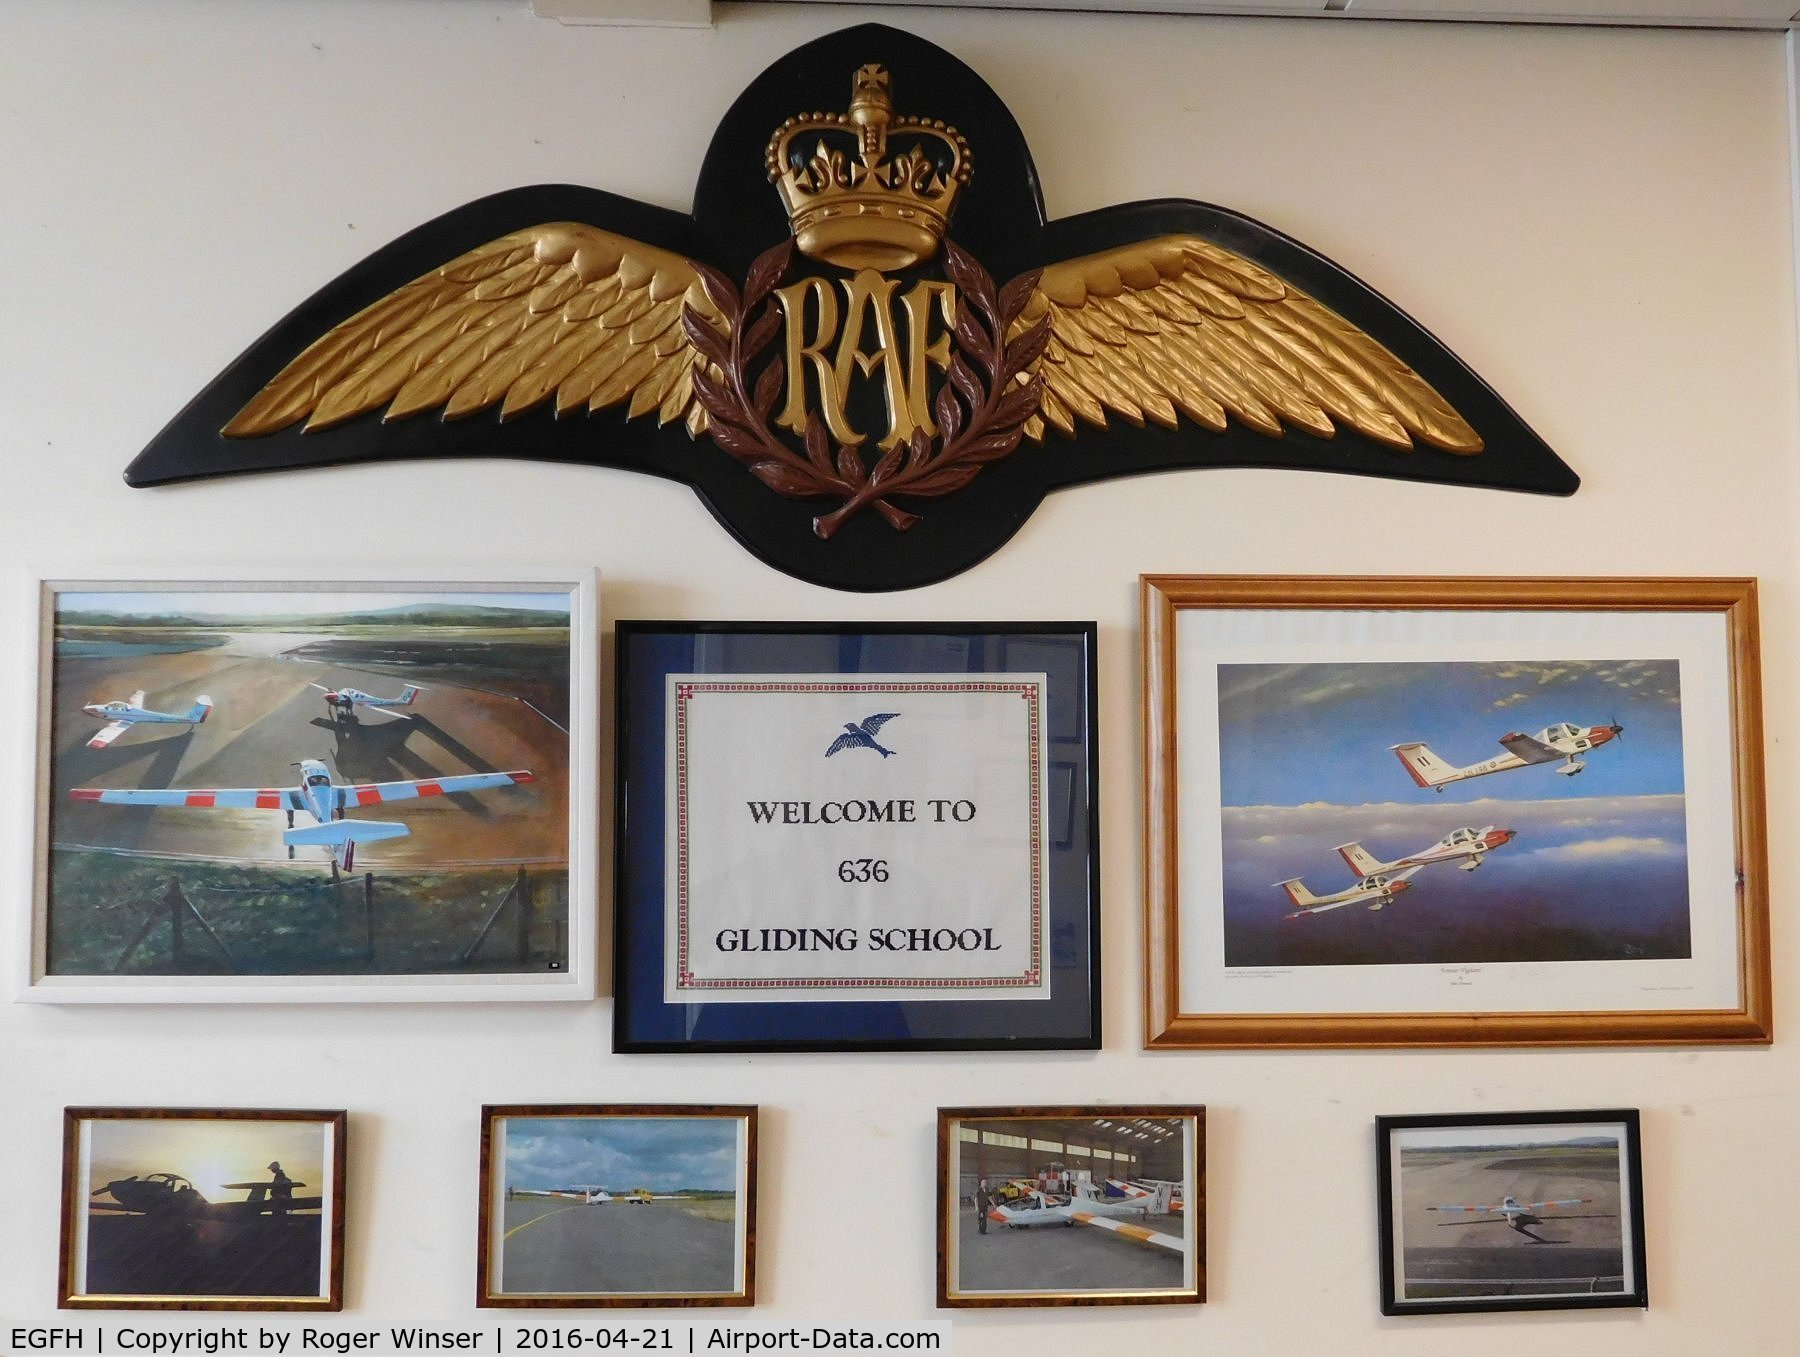 Swansea Airport, Swansea, Wales United Kingdom (EGFH) - 636 VGS was formed at Swansea Airport on 1st October 1964 and was disbanded at the end of March 2016. Items from the Air Cadets gliding unit have been put on display in Cambrian Flying Club thanks to Derek Clyde, the flying club's operations manager. 